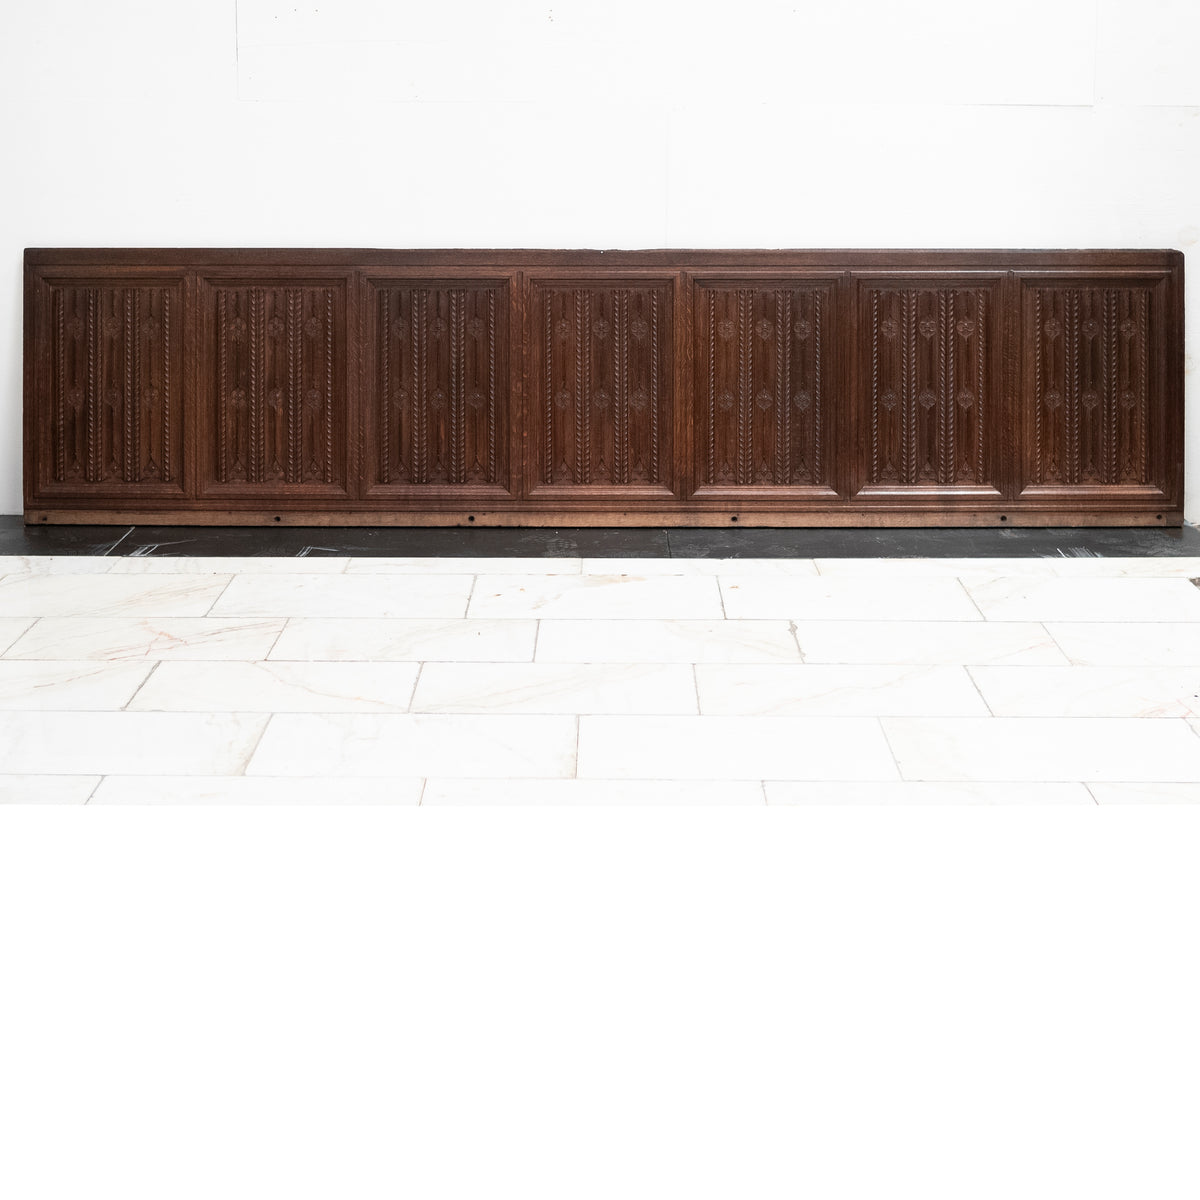 Antique Mid 19th Century Carved Linenfold Oak Panelling | The Architectural Forum